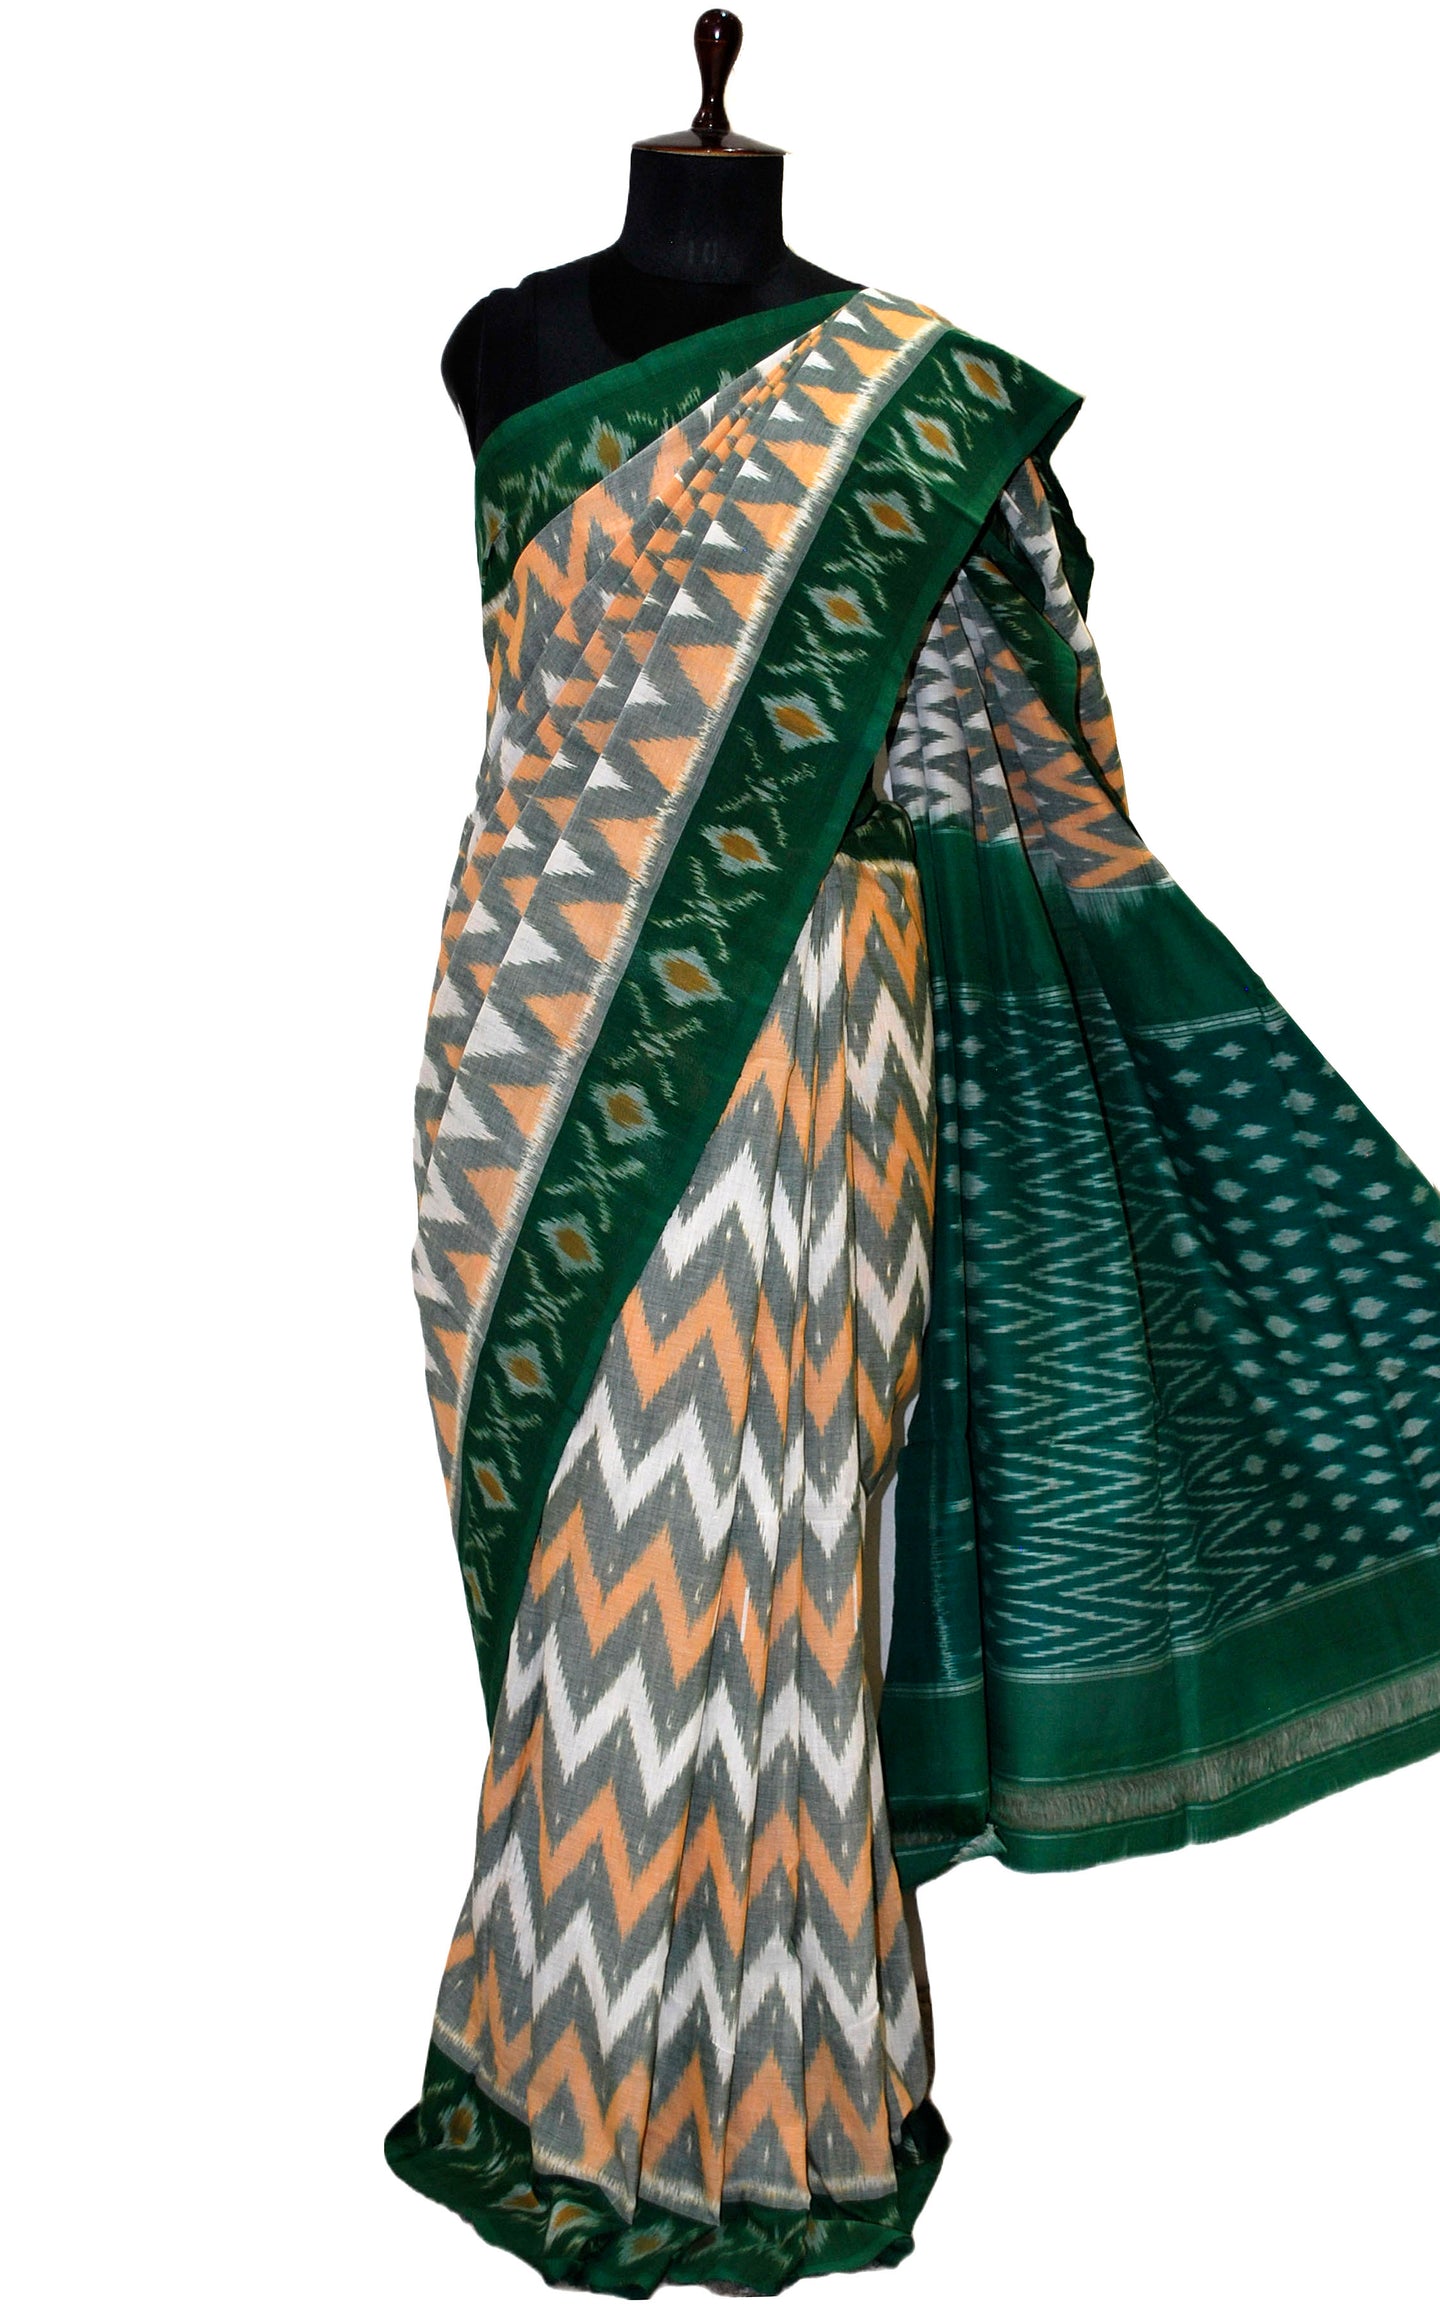 Soft Mercerized Cotton Ikkat Pochampally Saree in Off White, Multicolored and Bottle Green